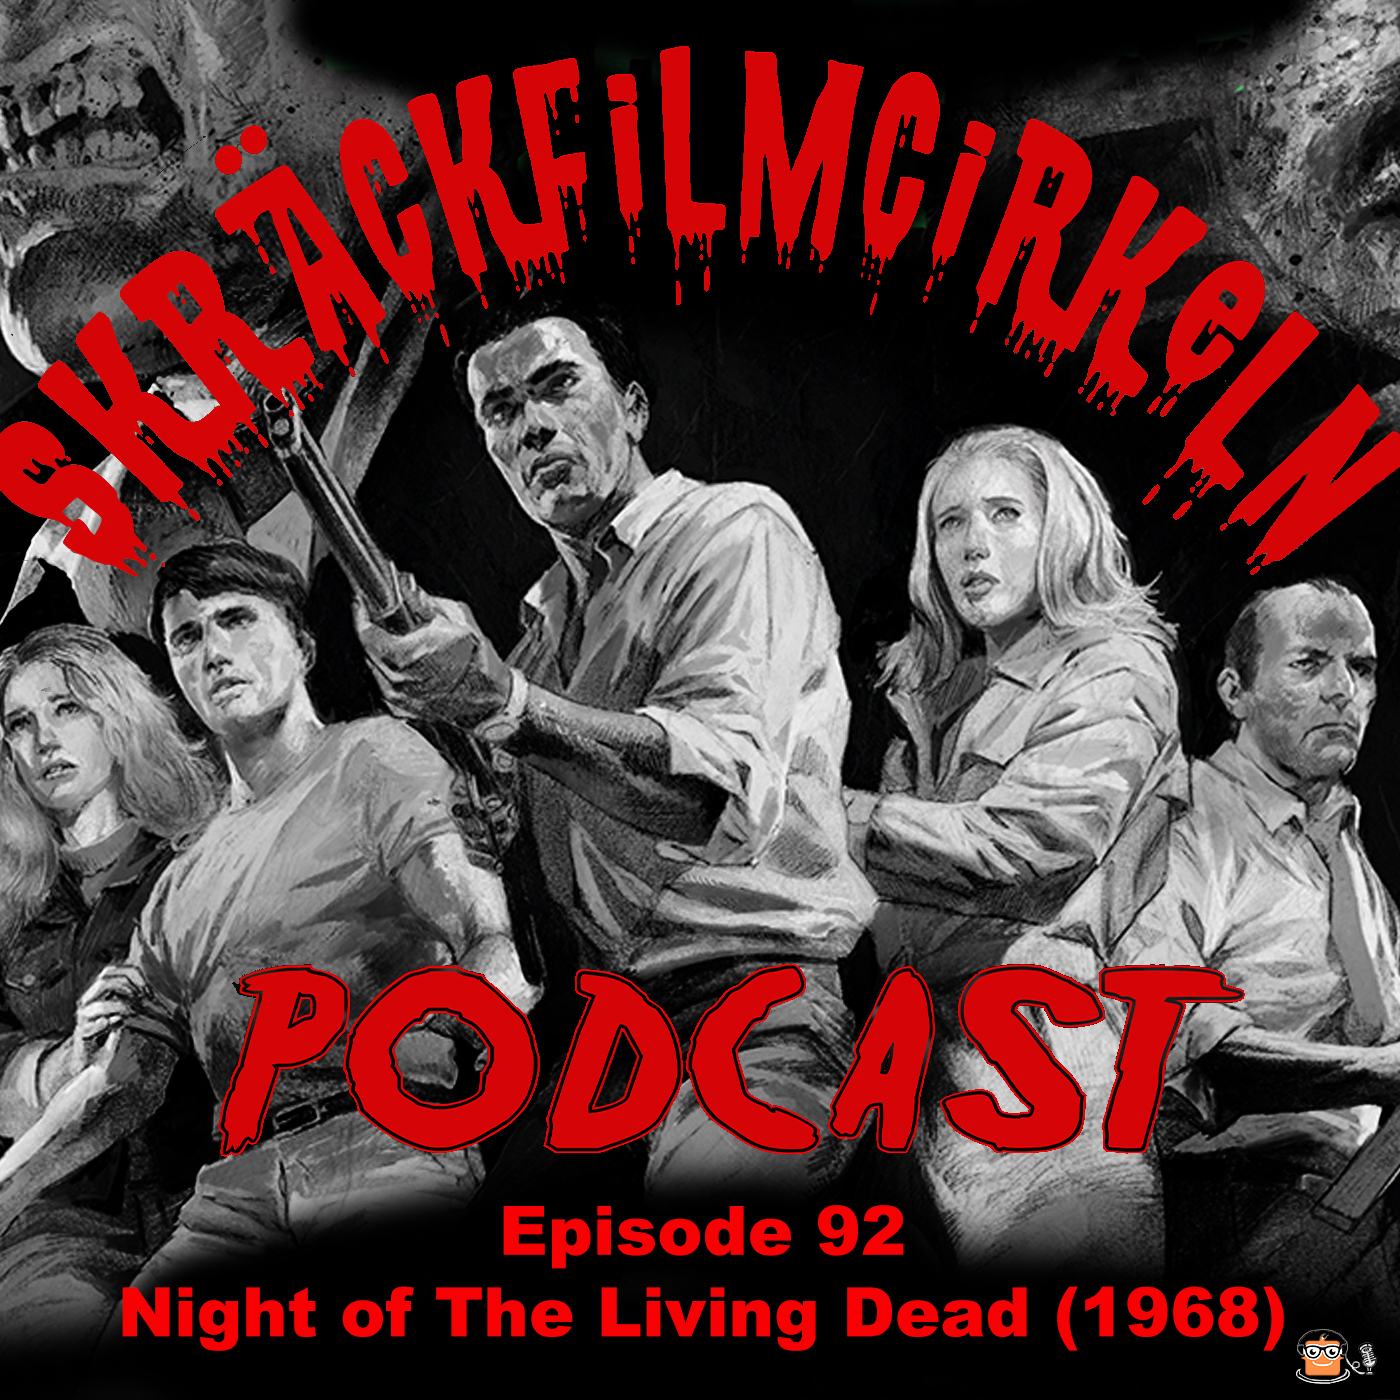 Episode 92 – Night of The Living Dead (1968)